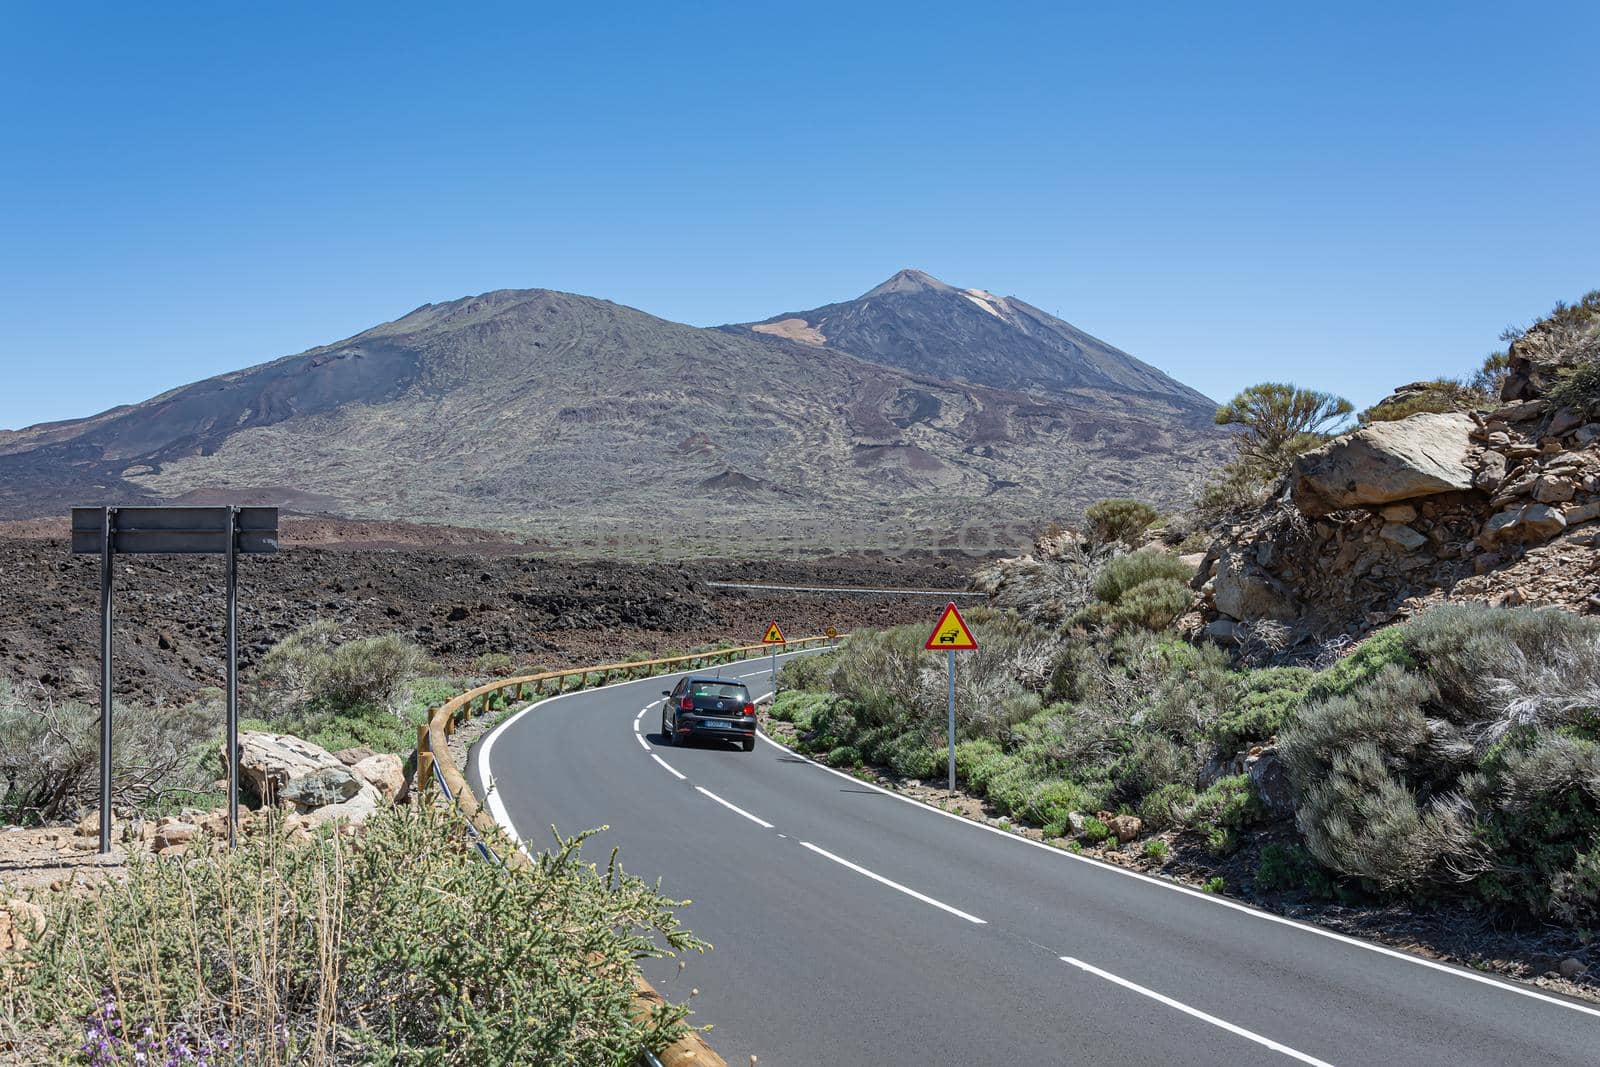 Tenerife island, Spain - 05/10/2018: Car rides on a mountain road by Grommik